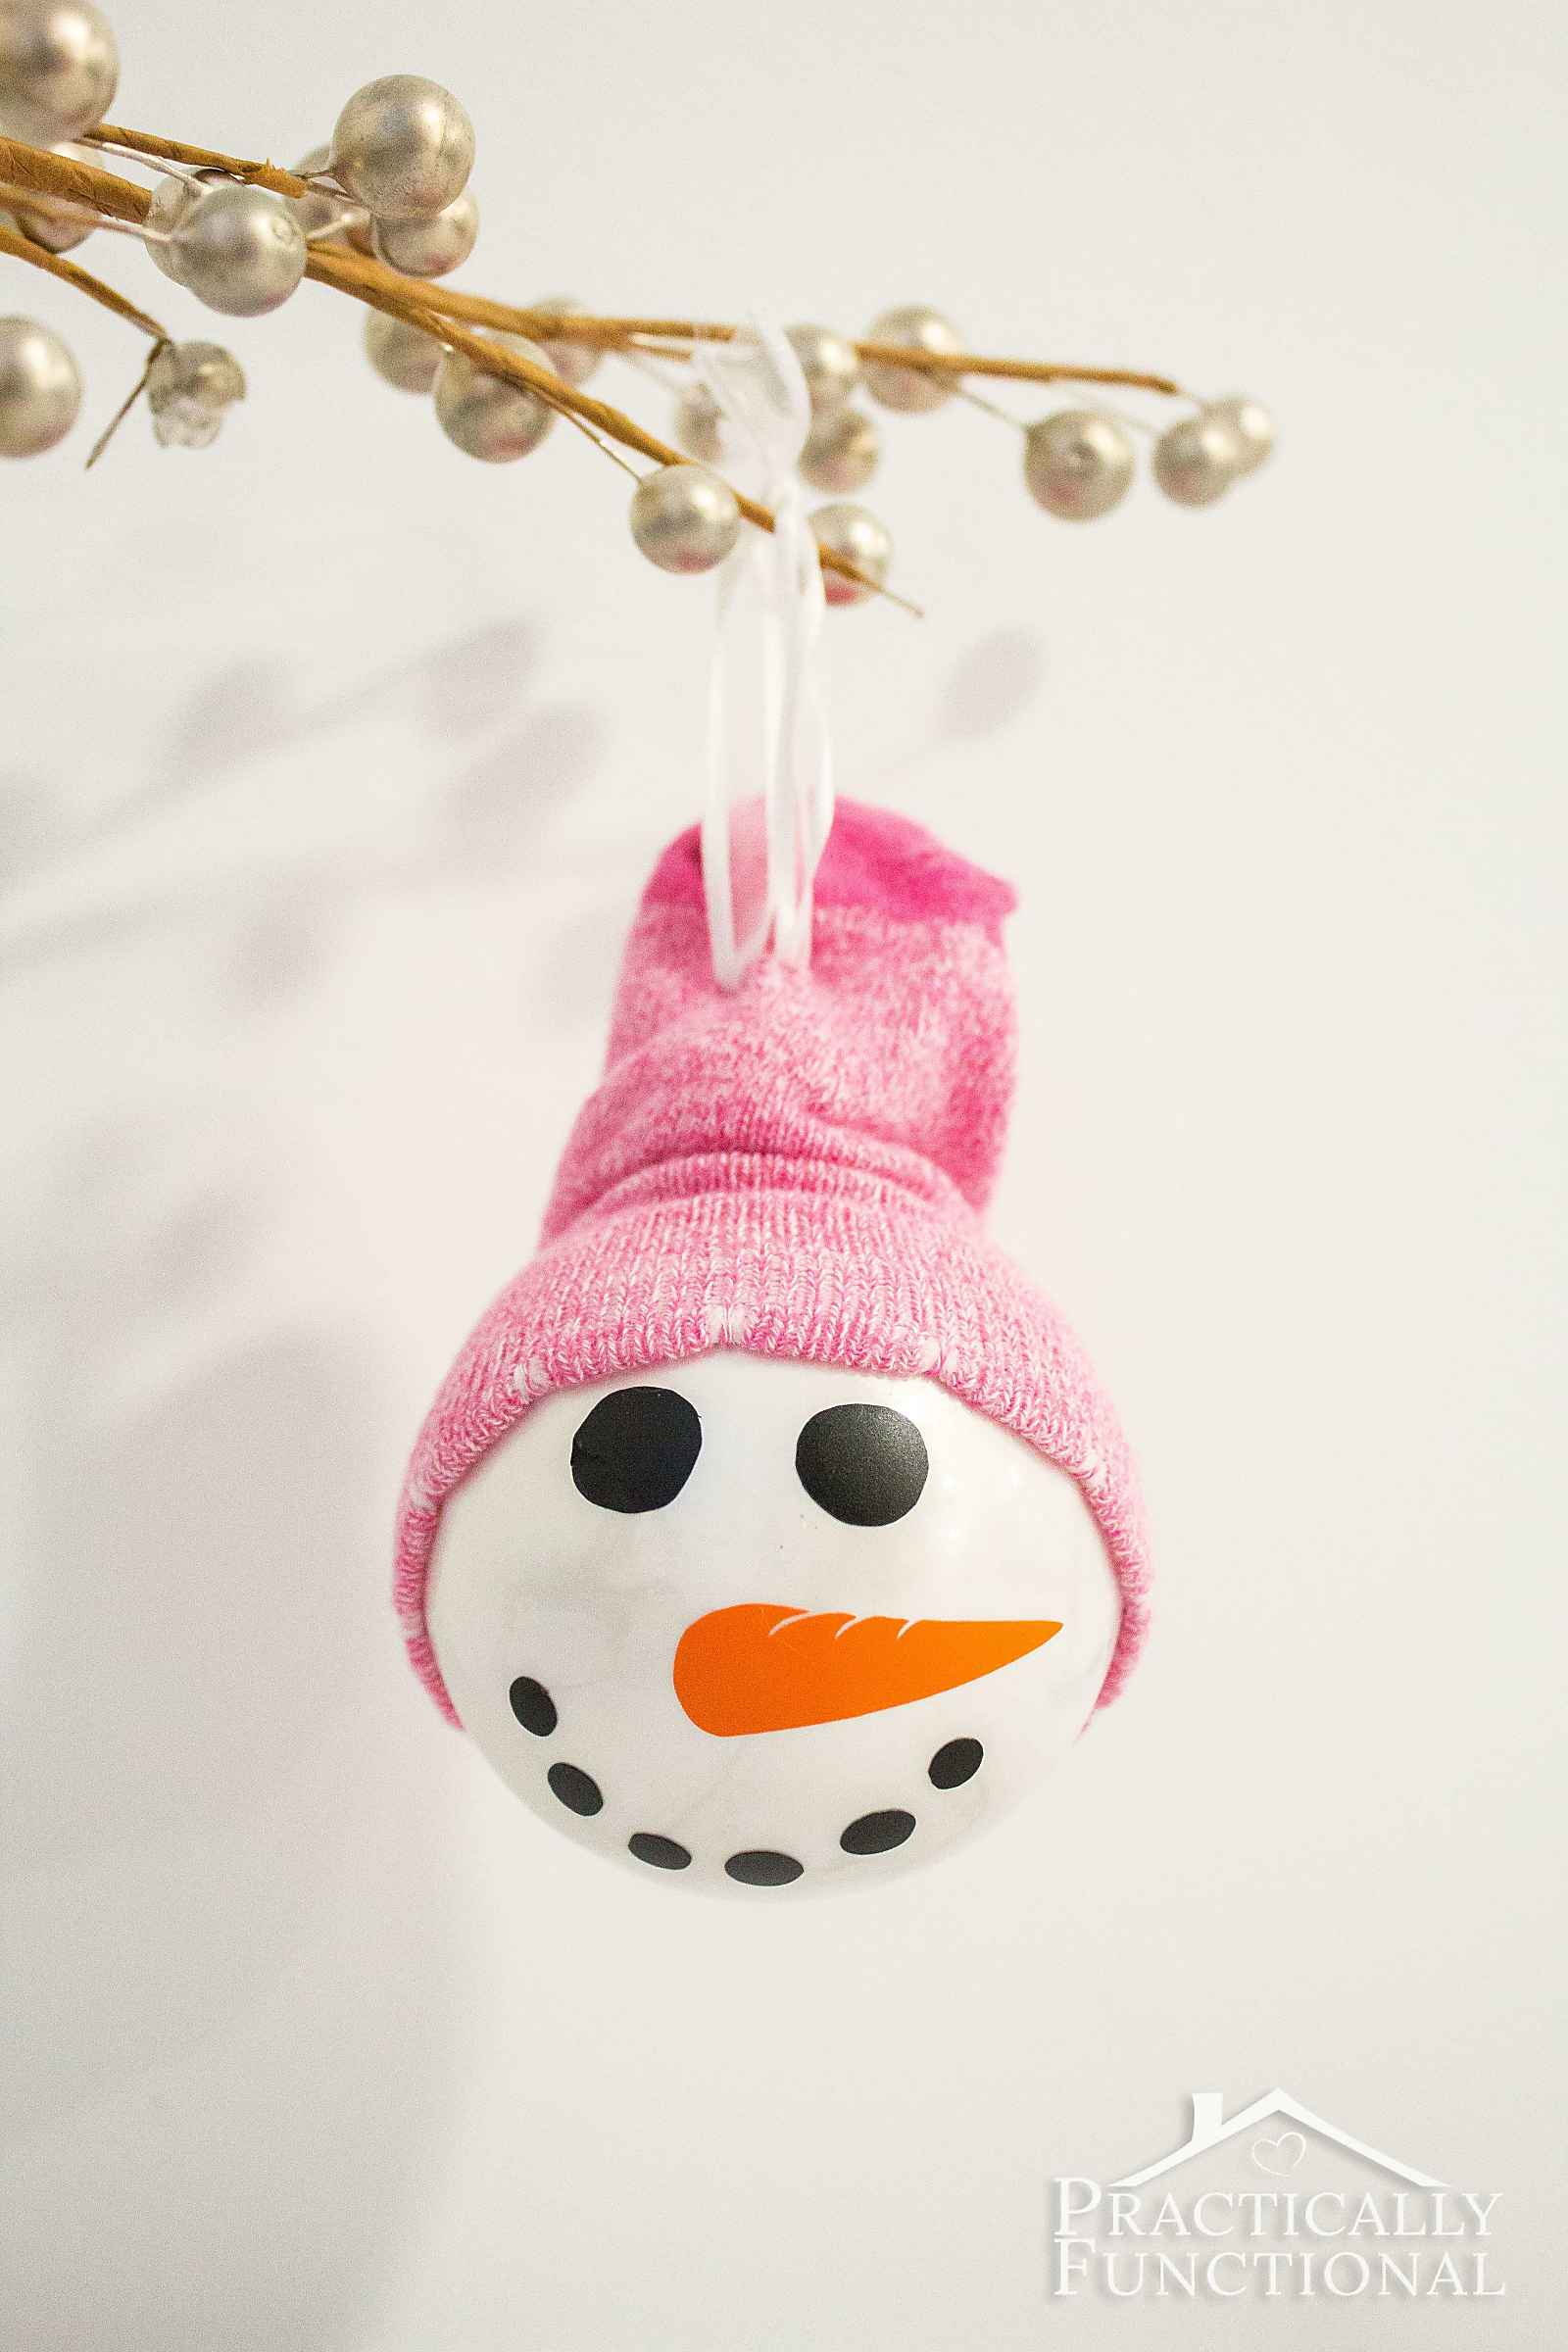 Got a sock that's missing it's pair? Make a cute DIY snowman ornament with it!